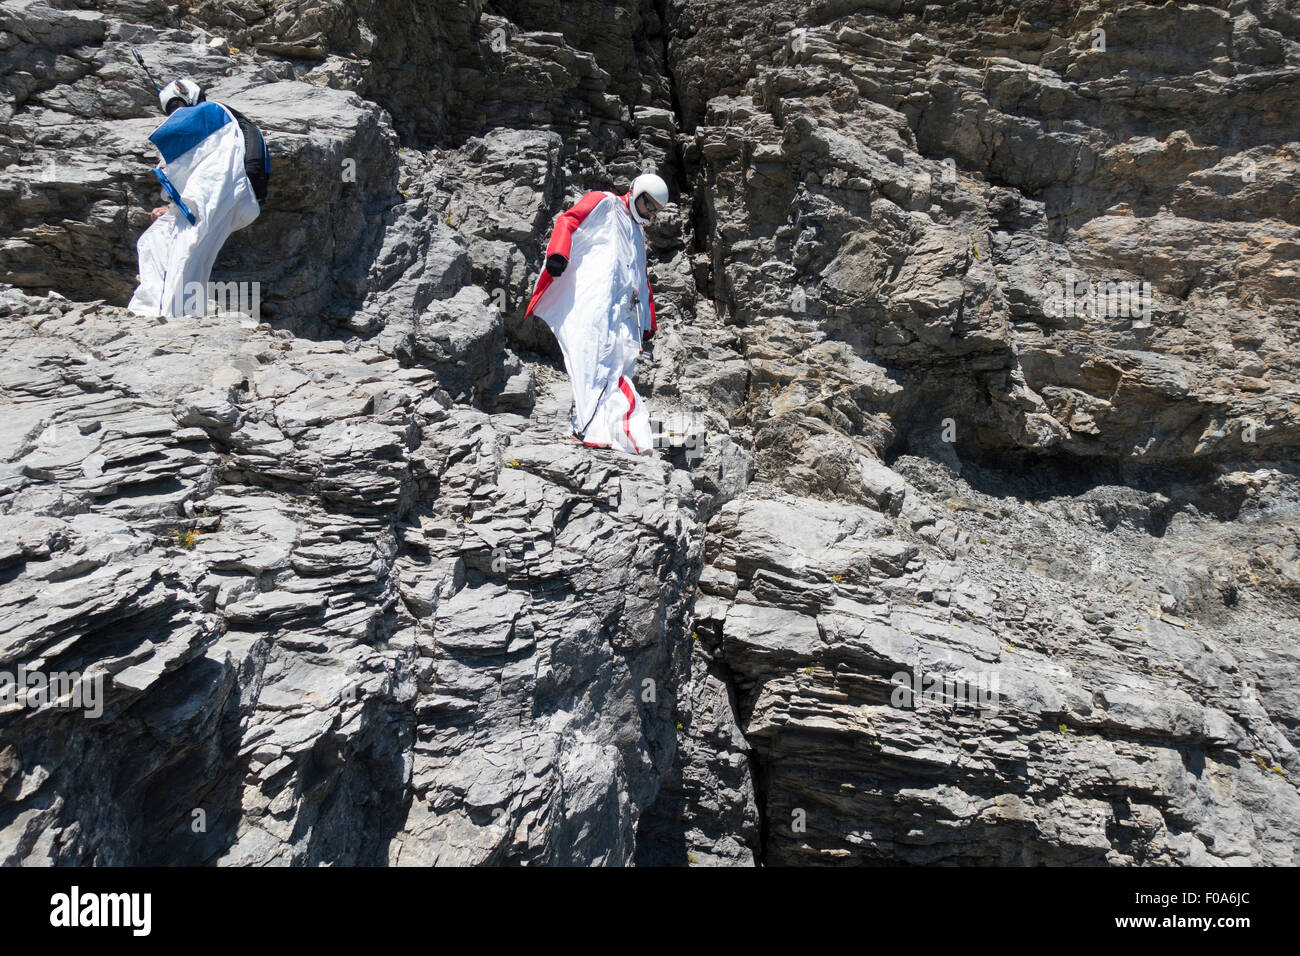 Wingsuit BASE jumpers are getting ready to jump off a cliff and checking the altitude by facing downward & adjusting his wings. Stock Photo